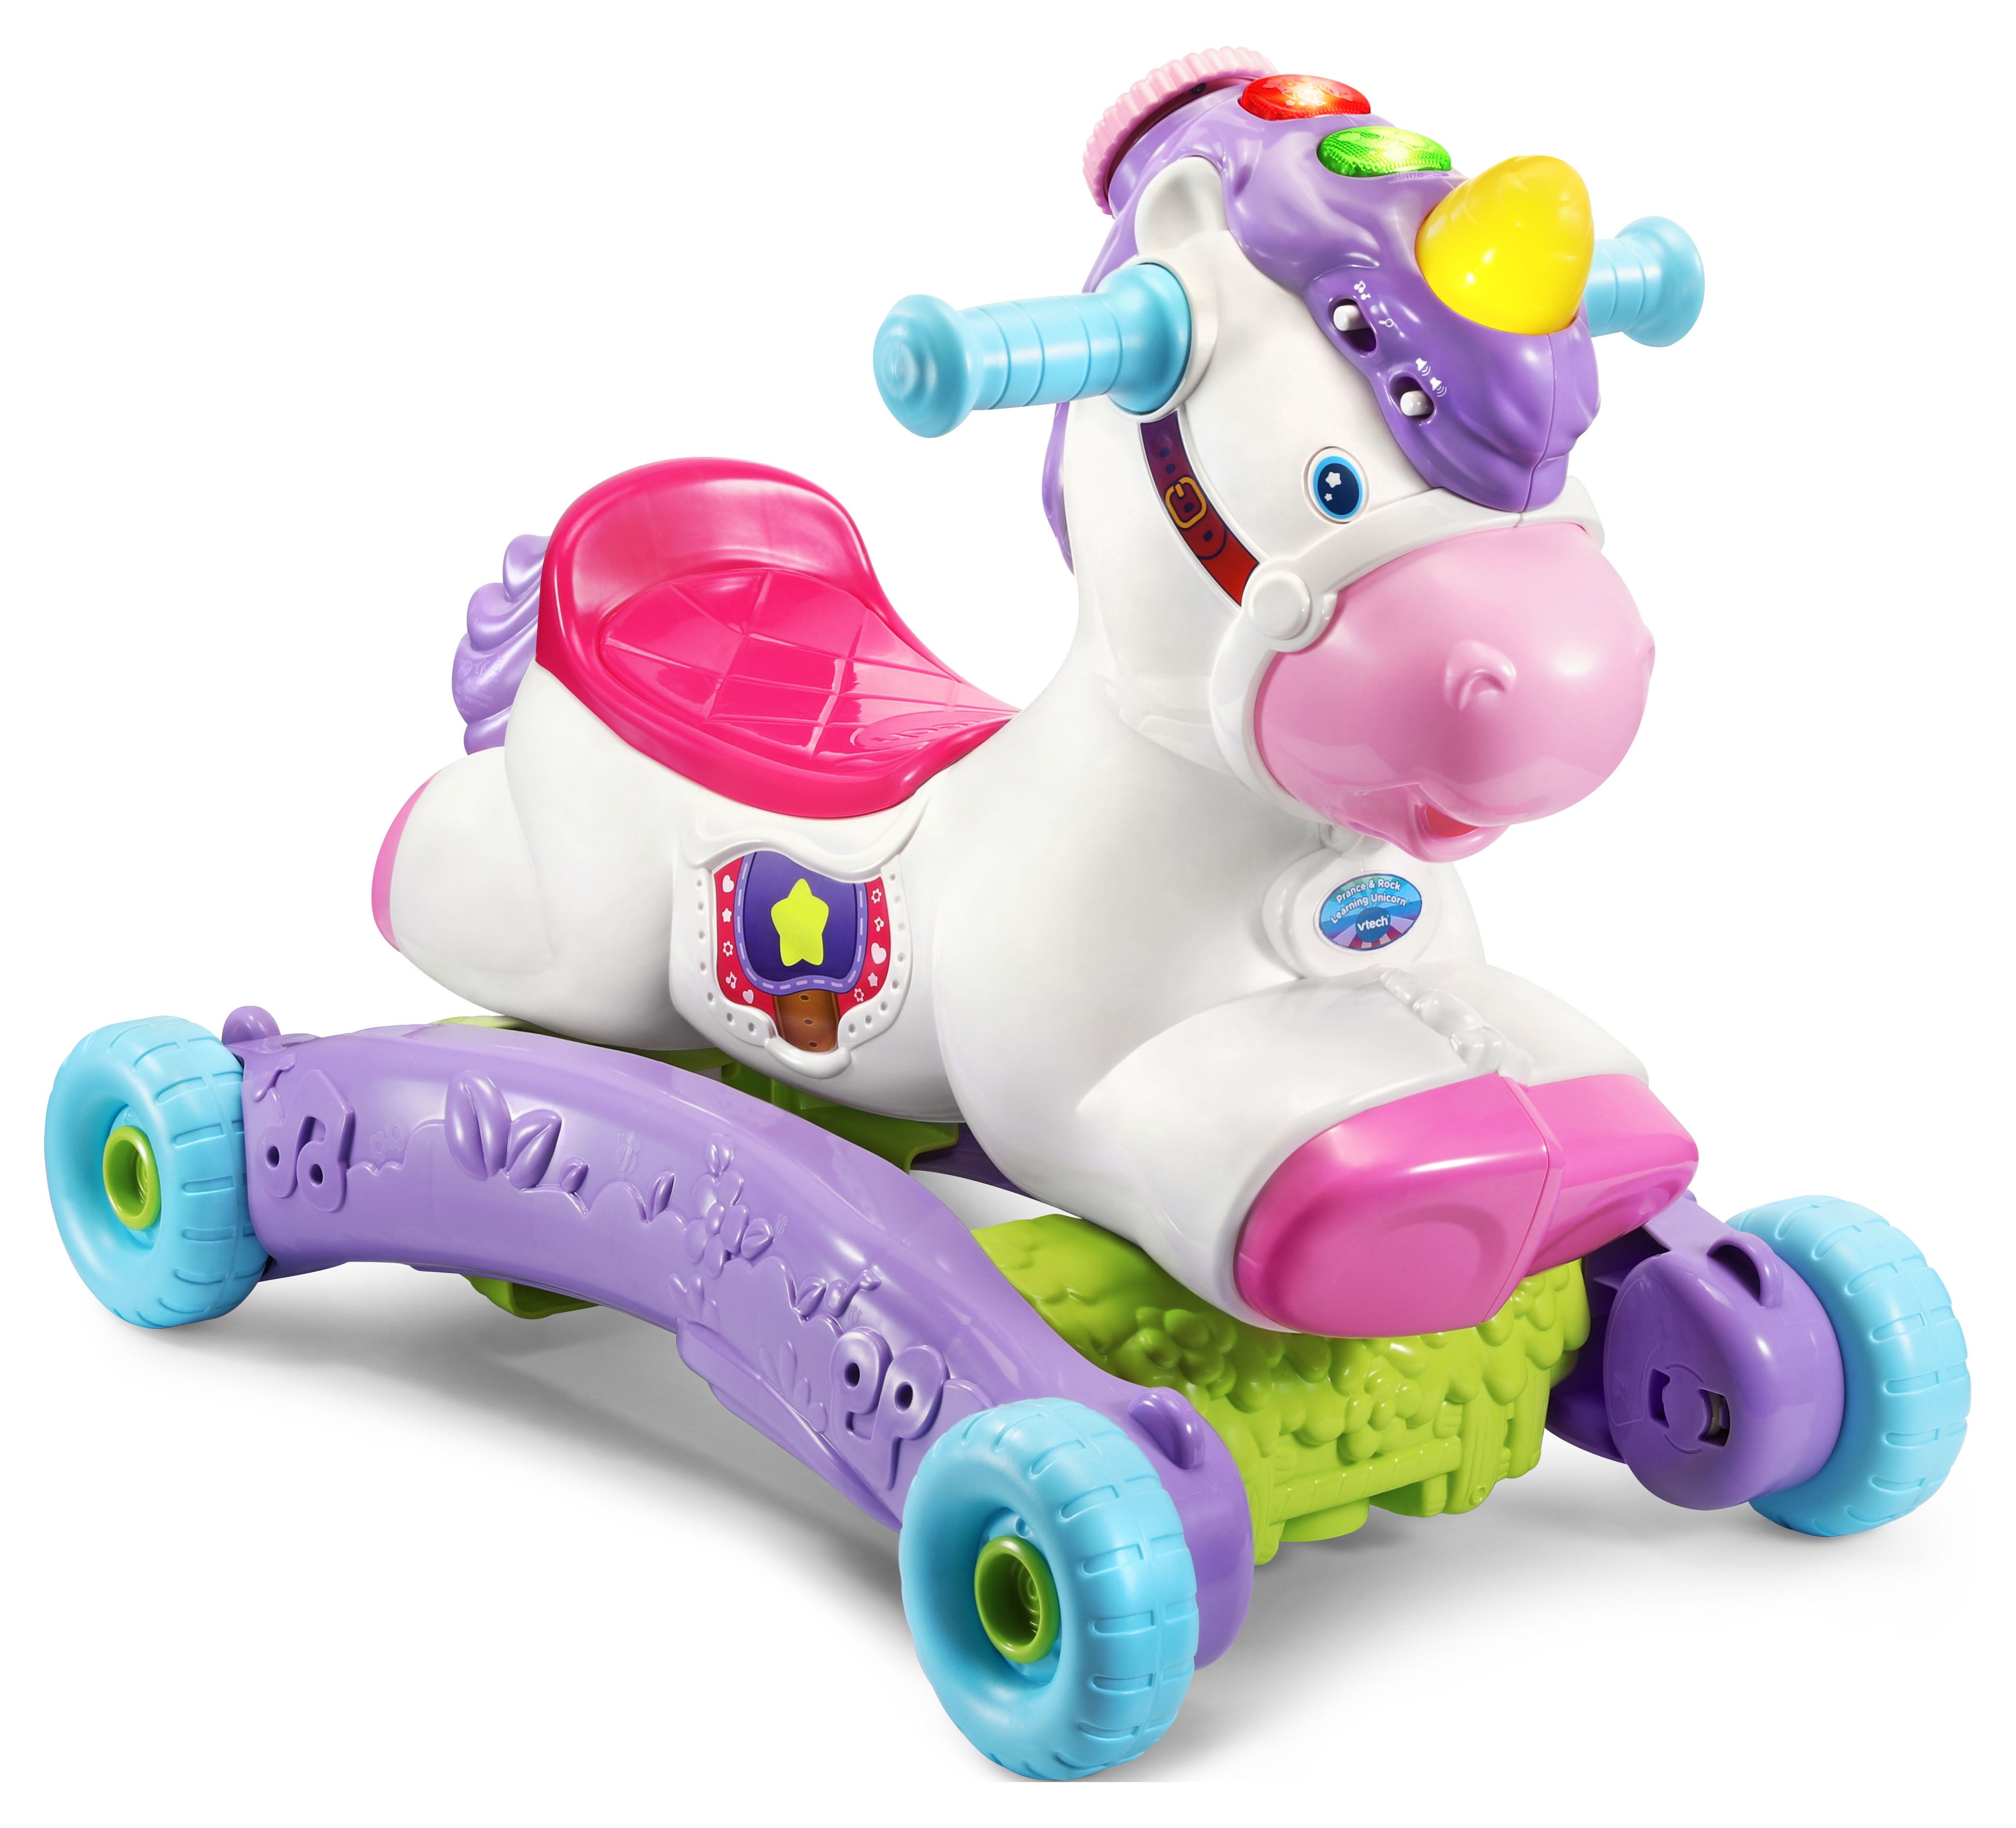 VTech Prance and Rock Learning Unicorn, Rocker to Rider Toy, Motion-Activated Responses - image 1 of 14